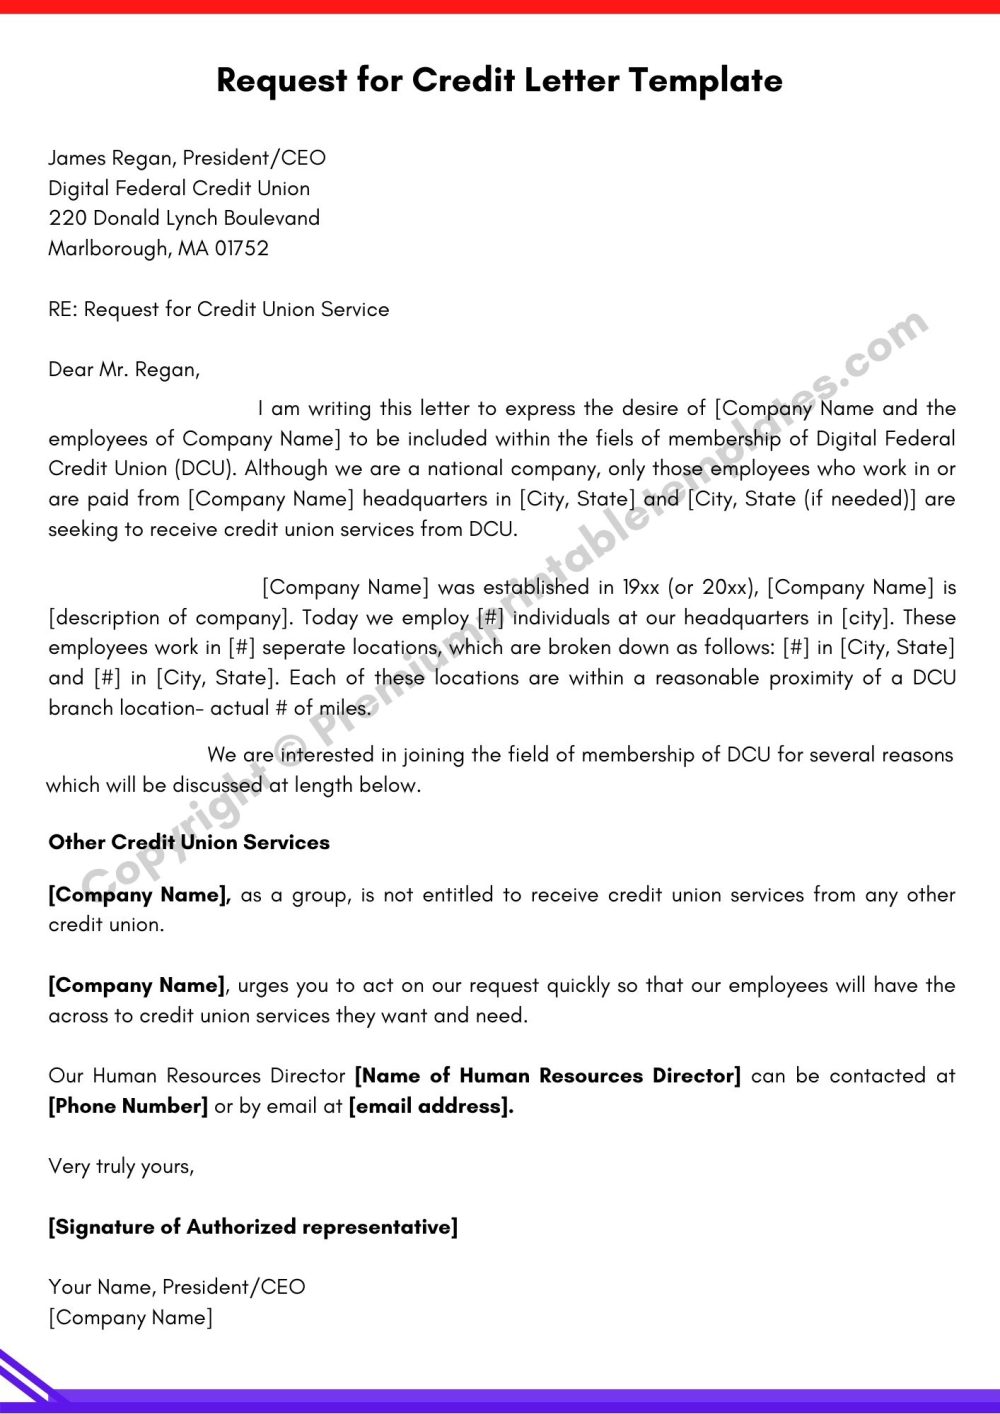 Request for Credit Letter PDF